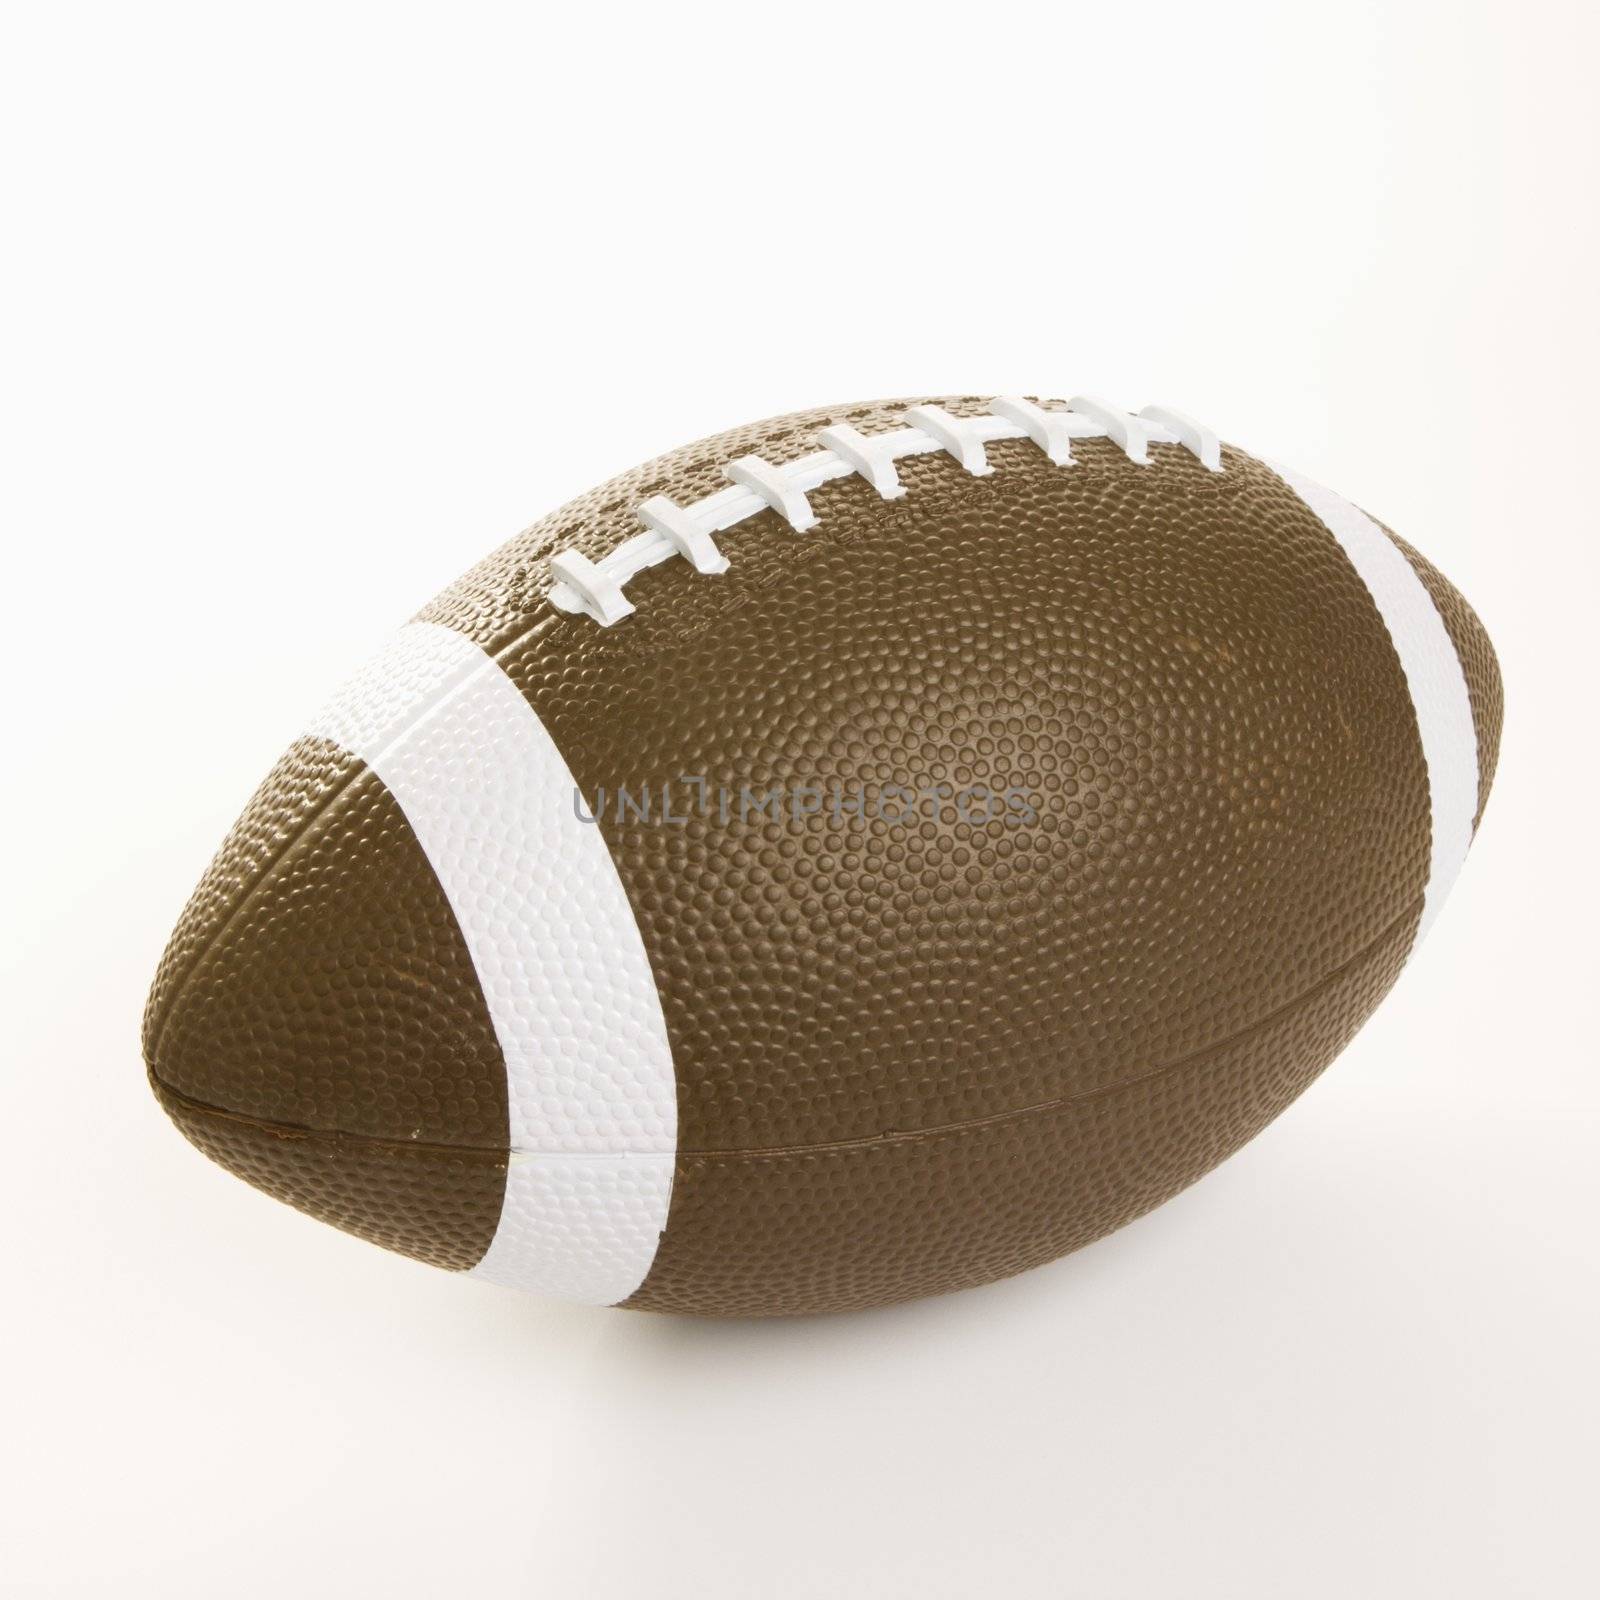 American football on white background.